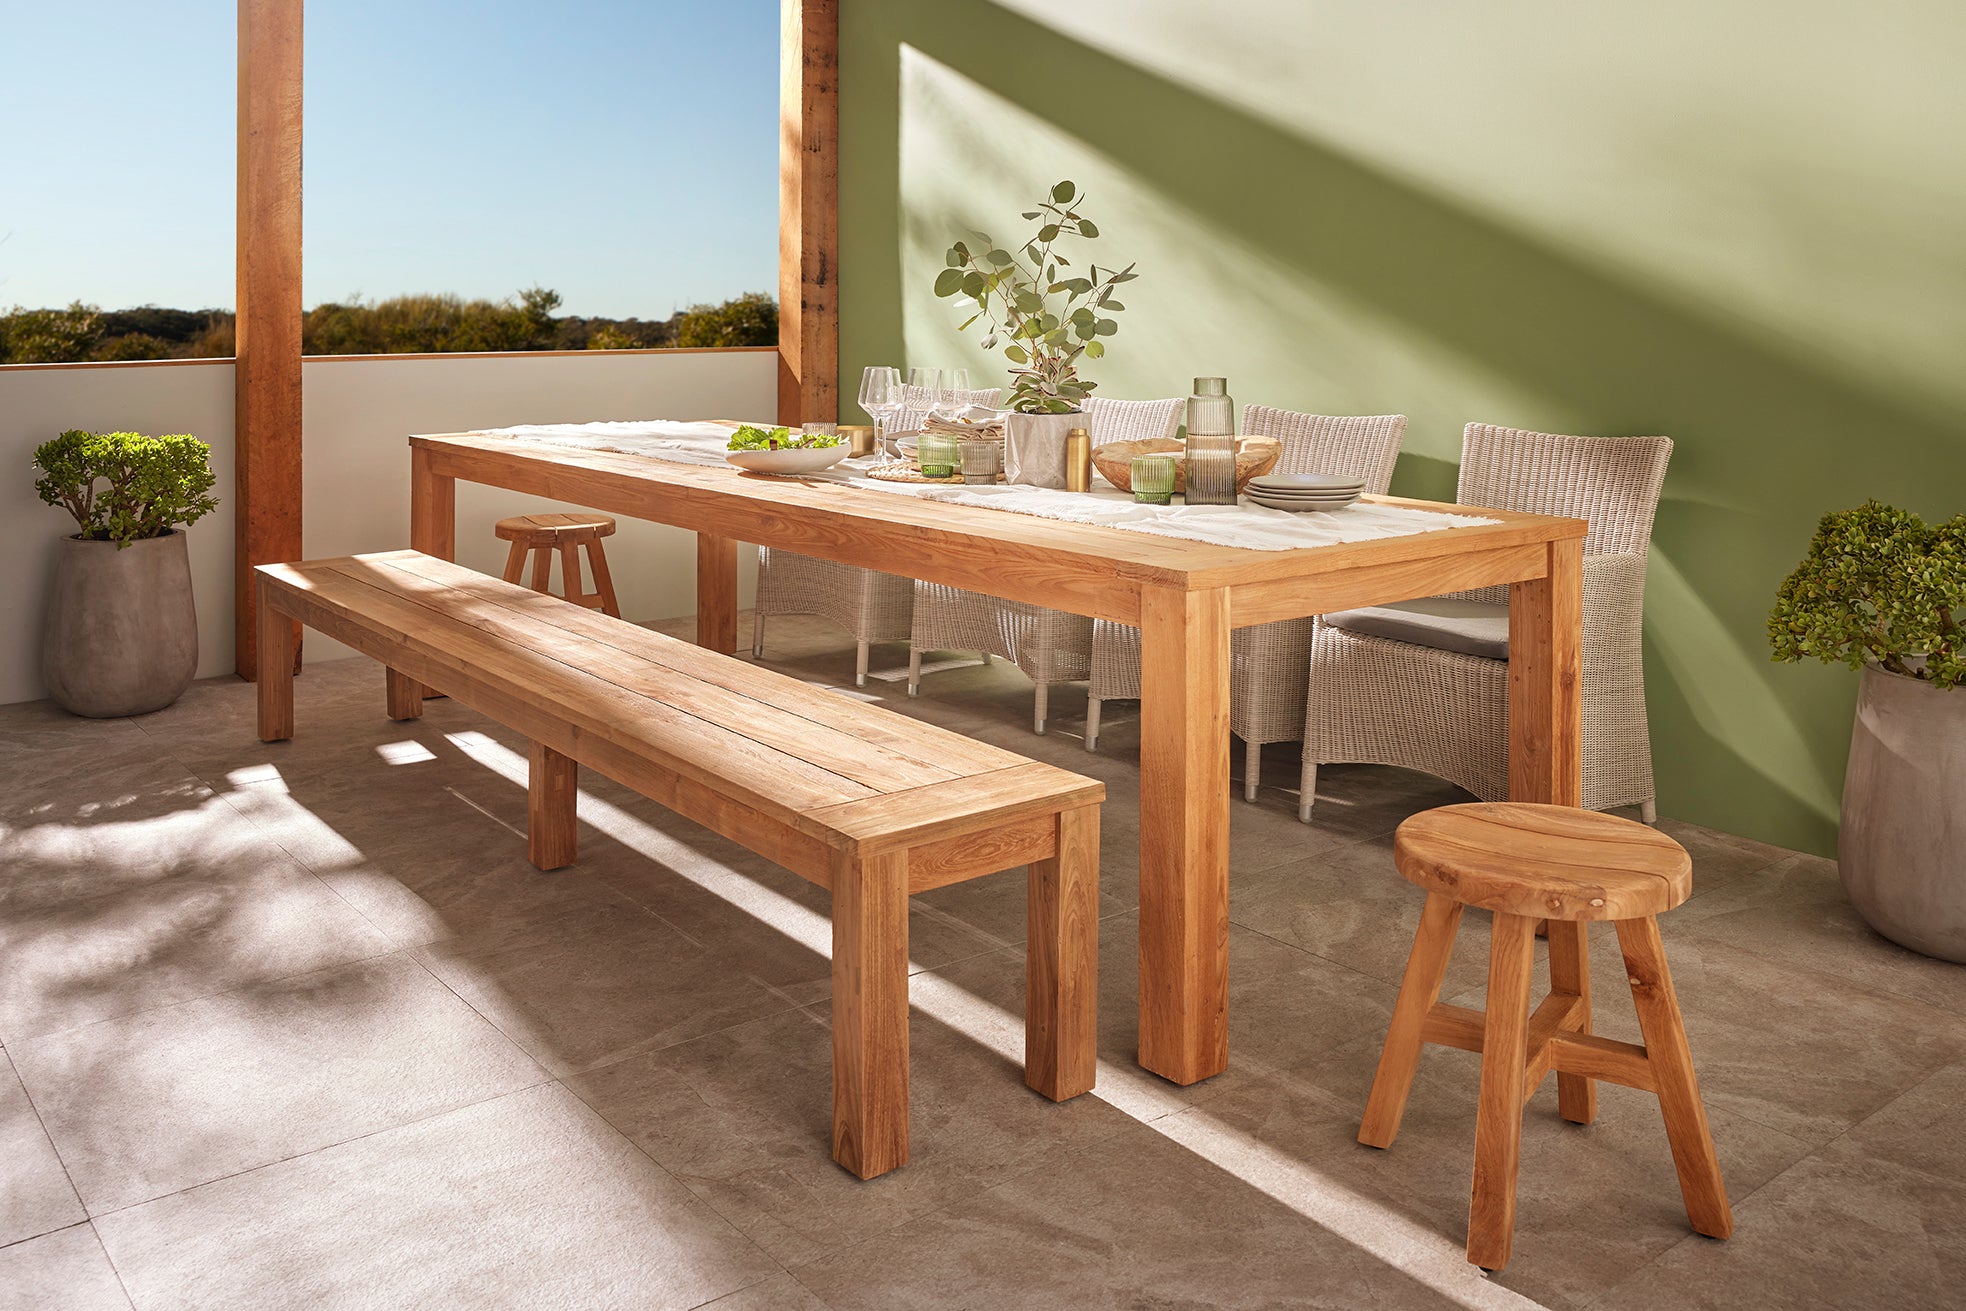 Why Choose Teak Wood Outdoor Furniture? Benefits and Care Guide